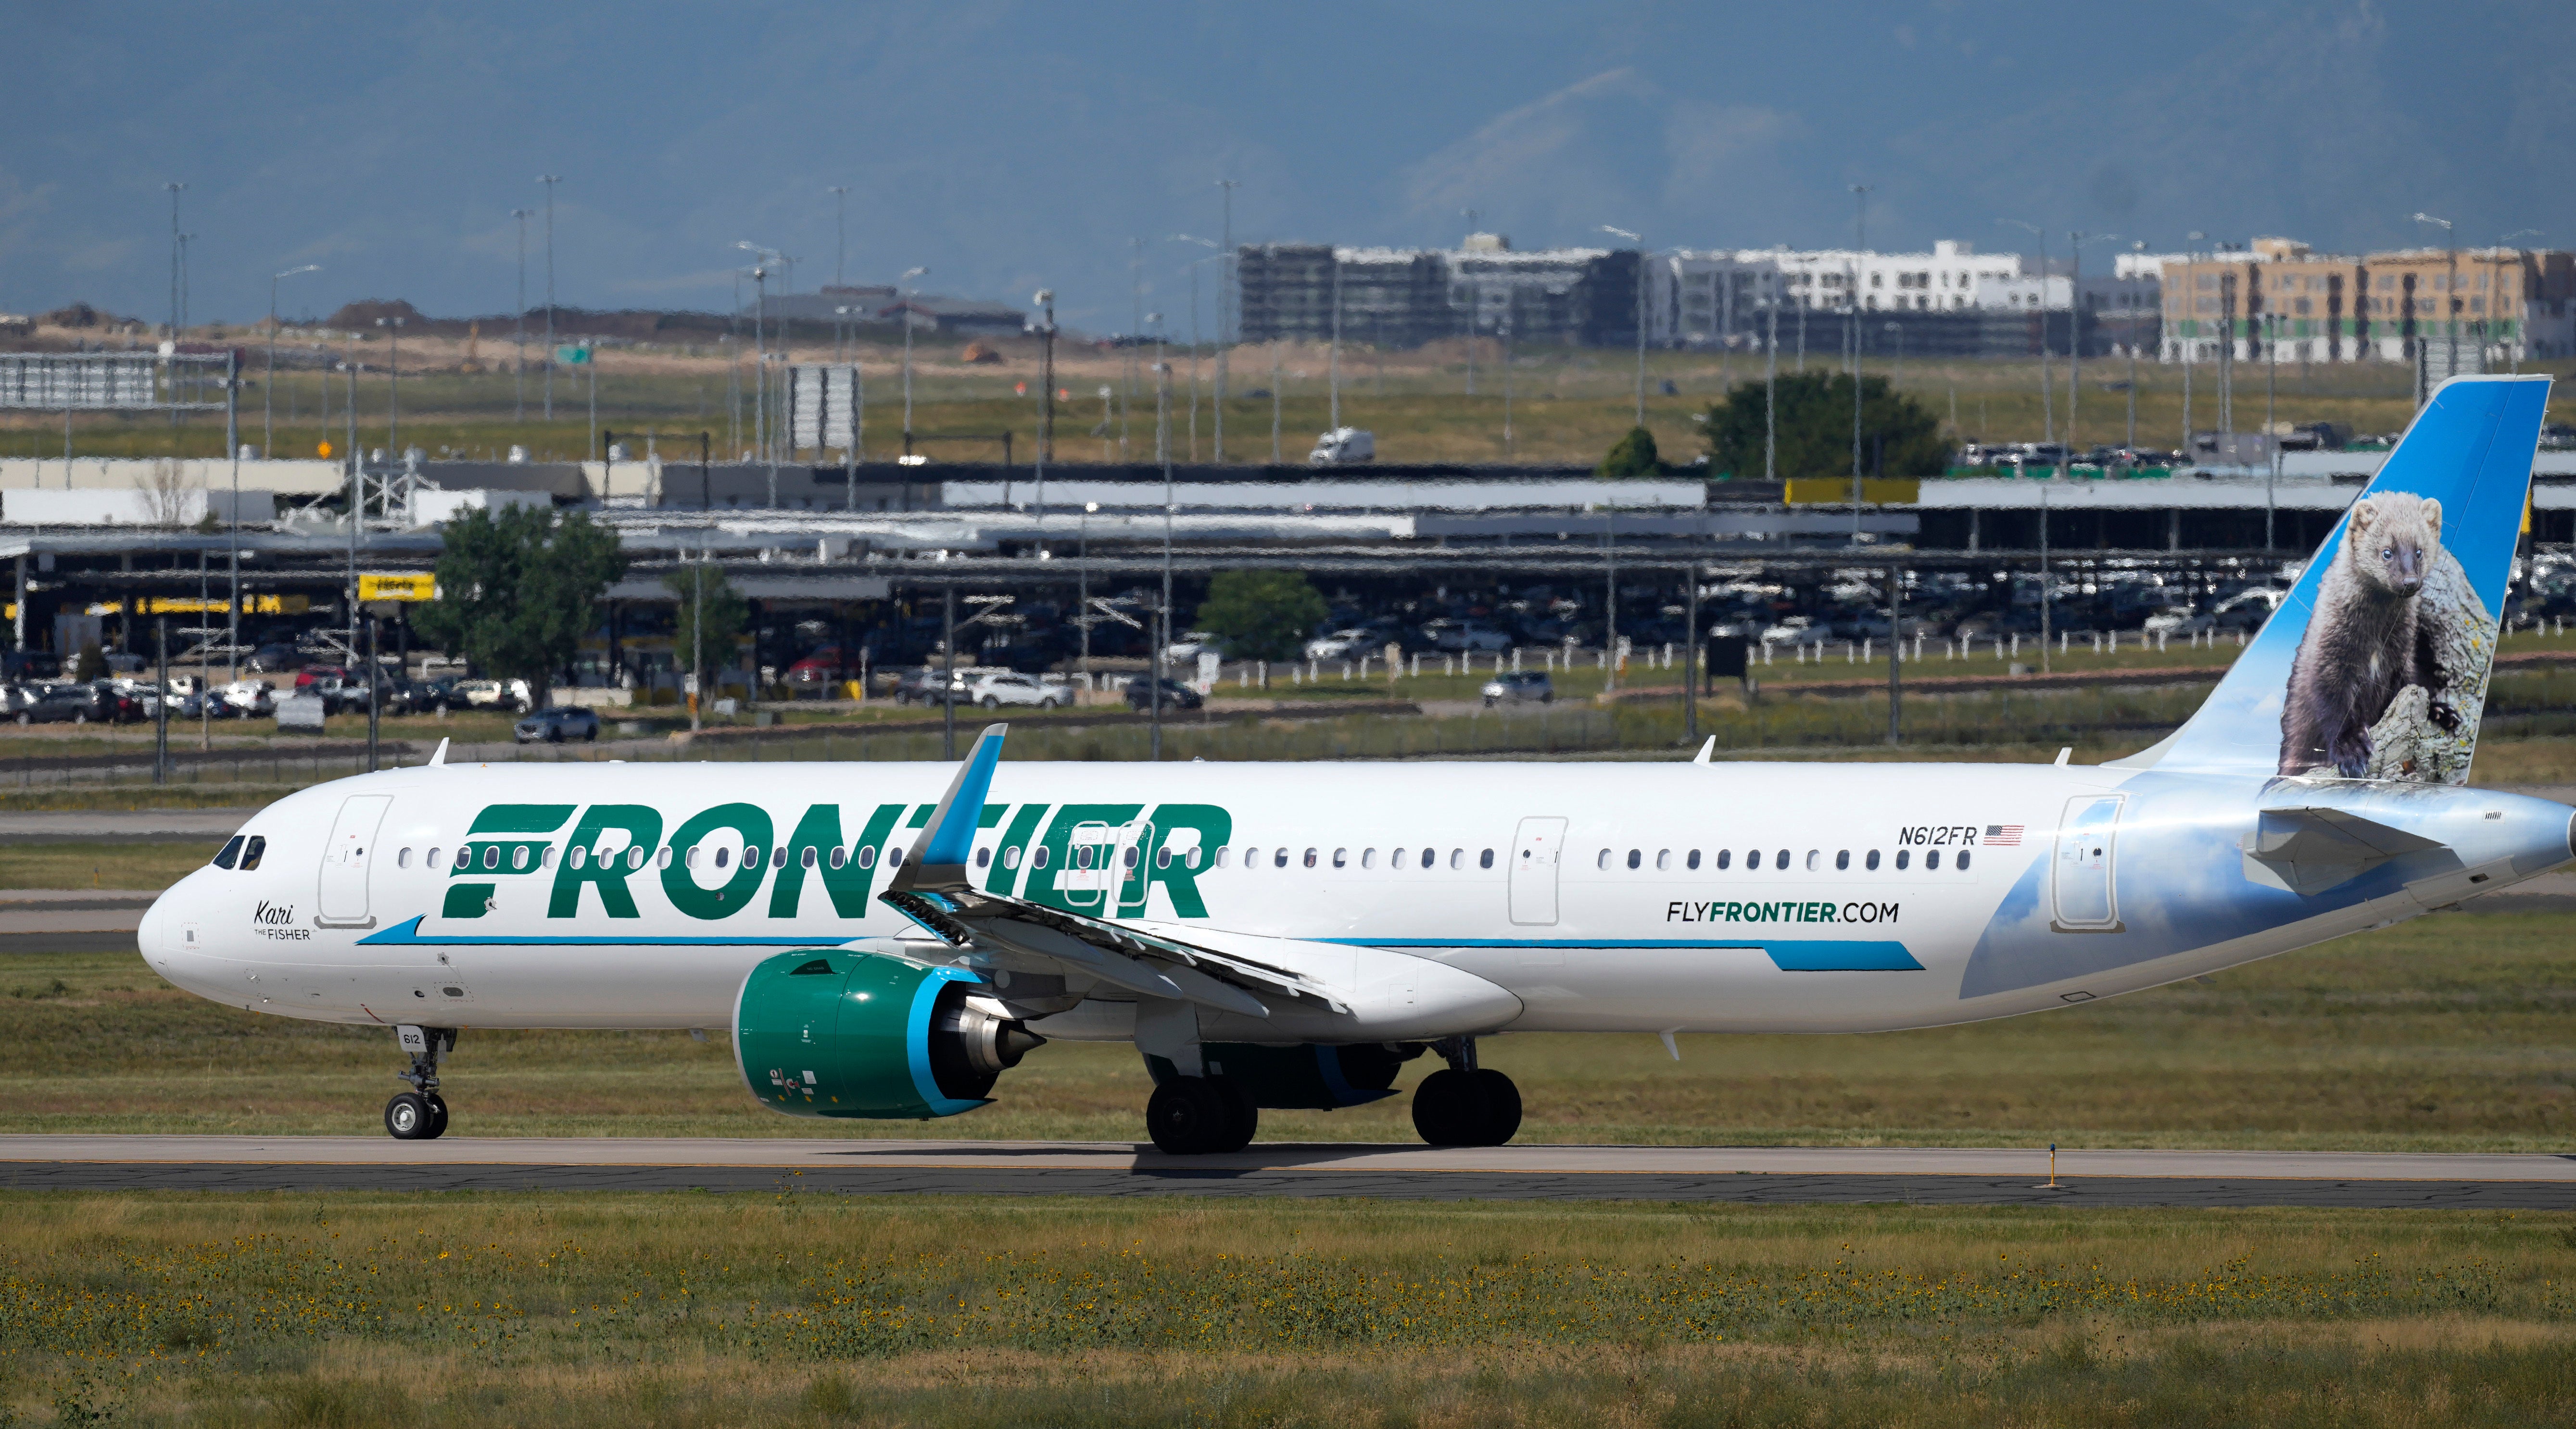 The incident occurred on a Frontiers Airlines flight in November